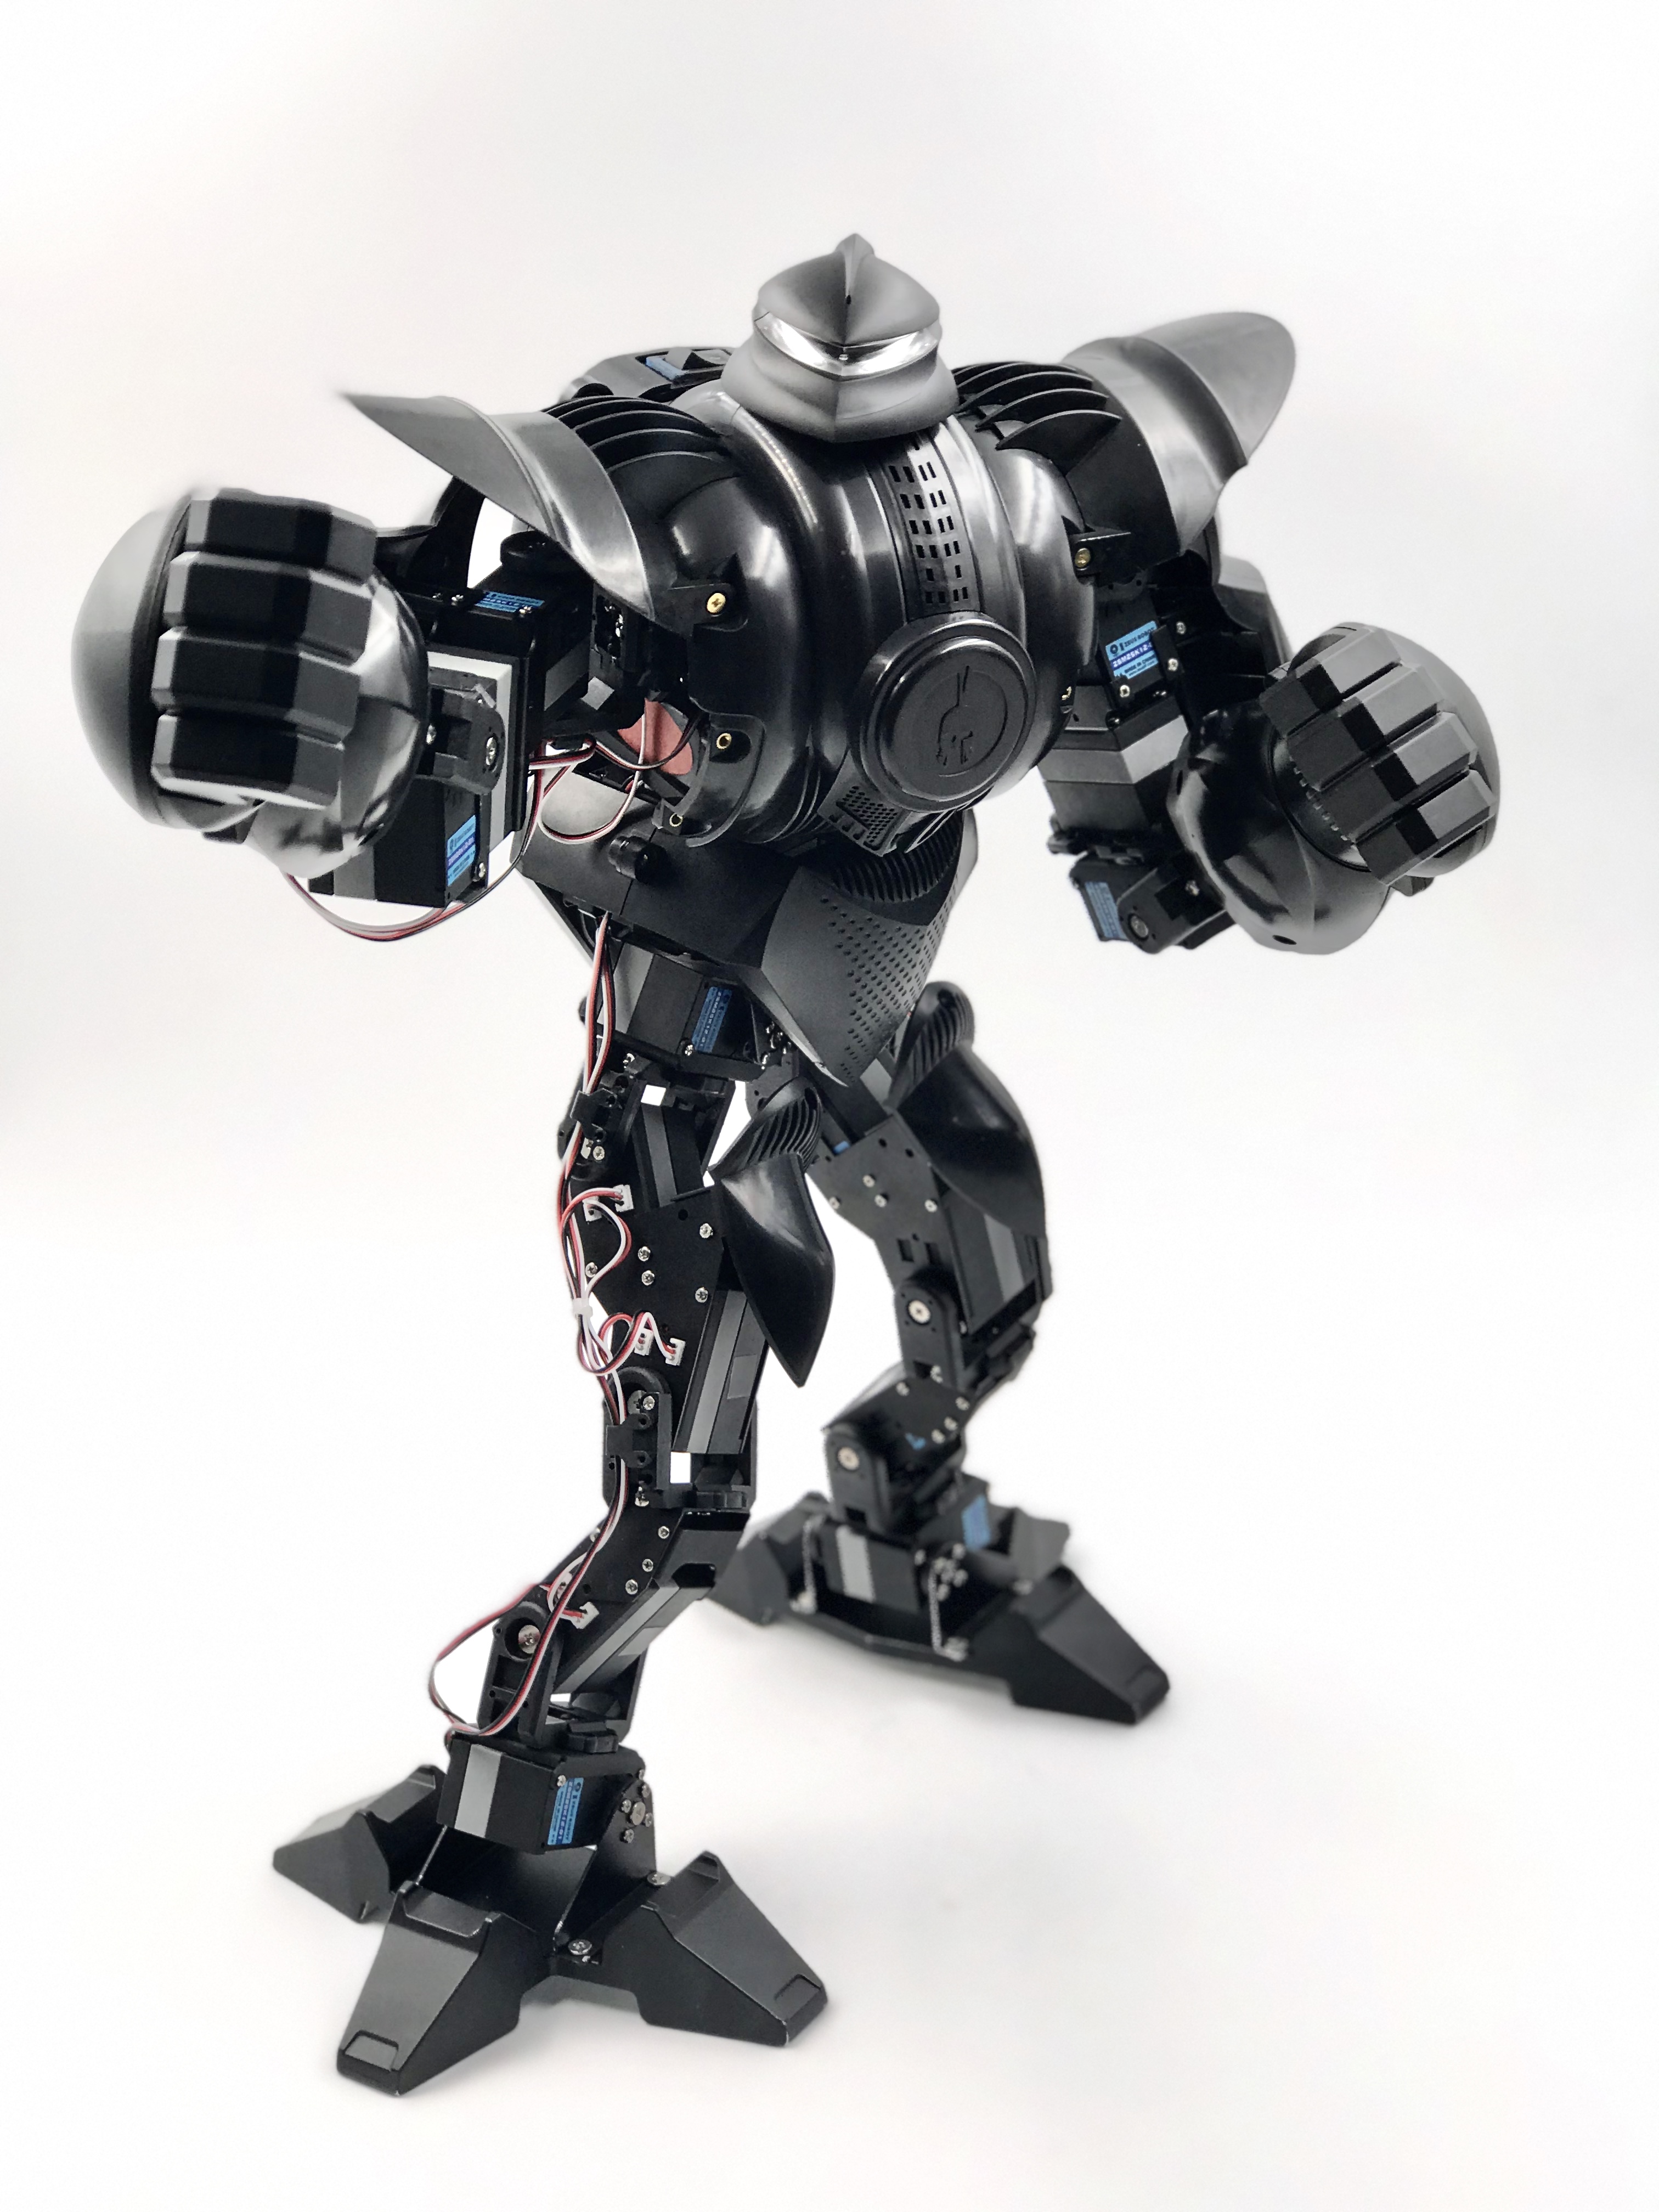 Battle Robot Upgrades Fighting To New Levels Electrical Engineering News and Products